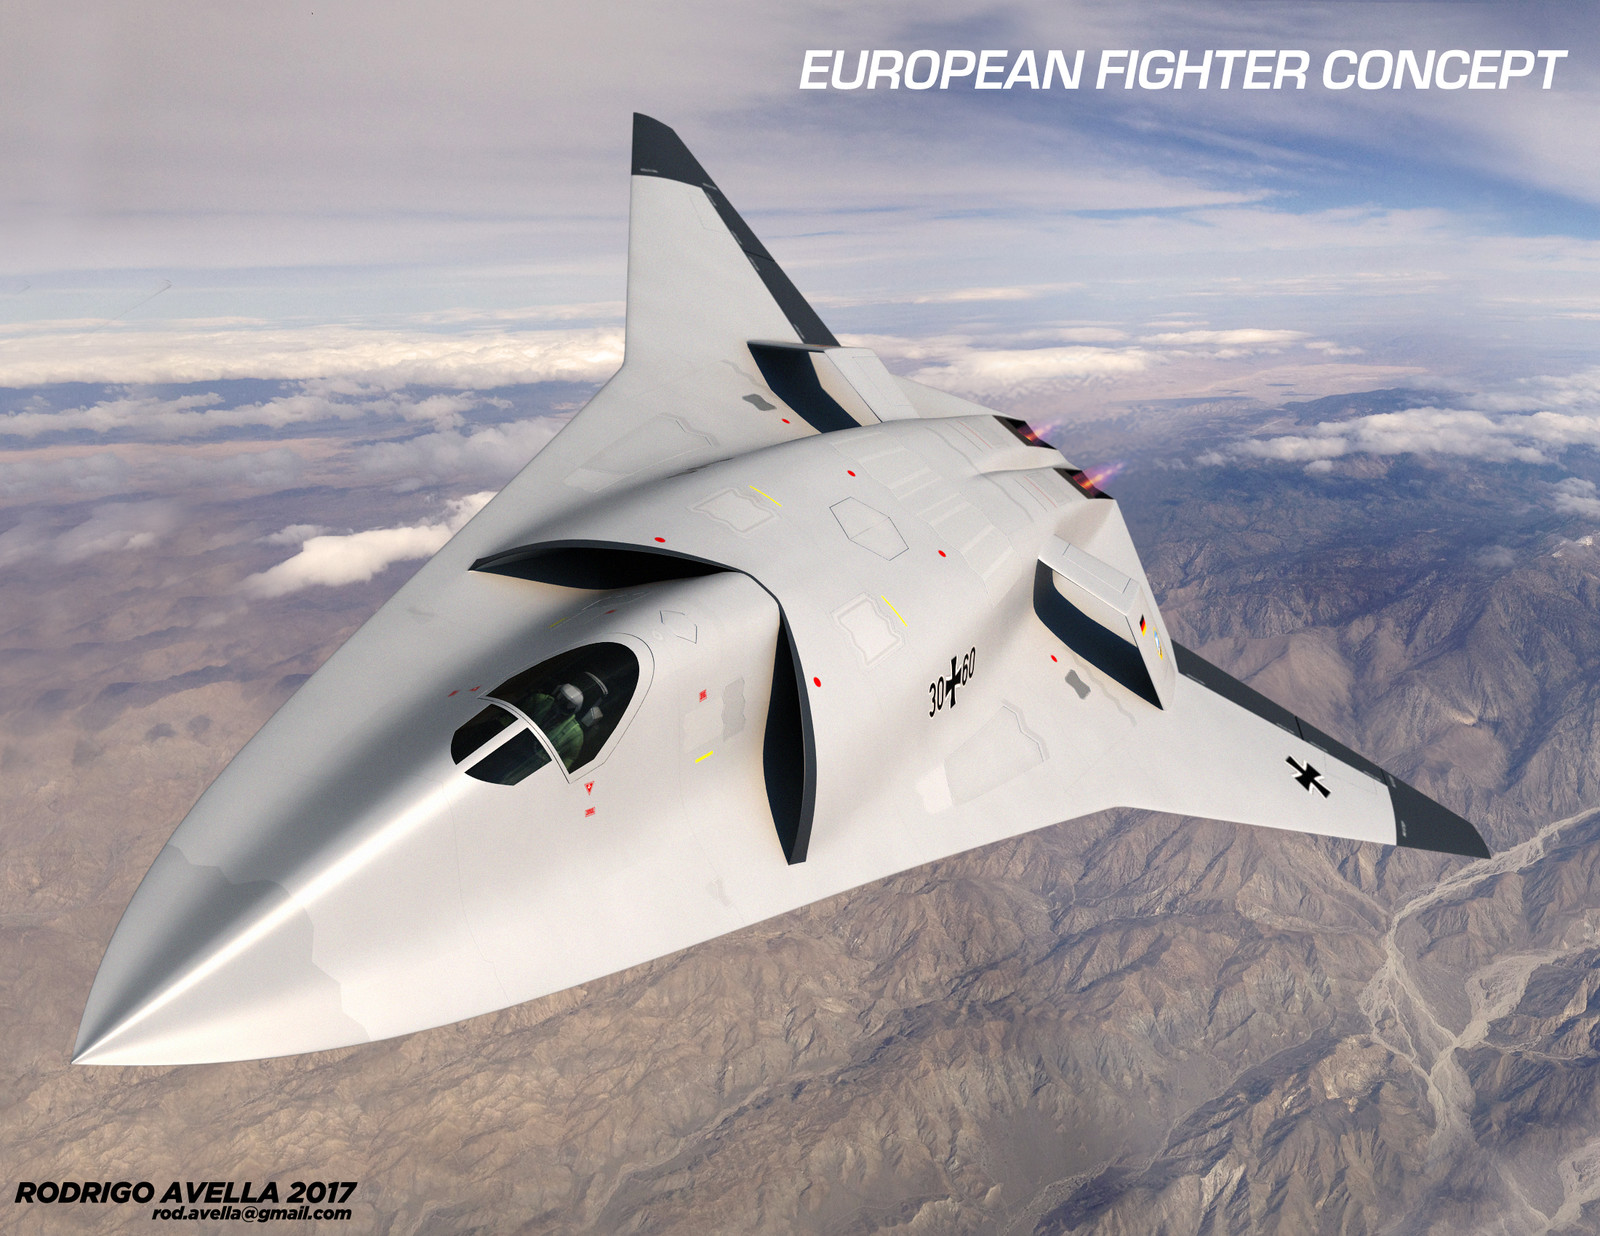 European sixth-generation concept fighter aircraft